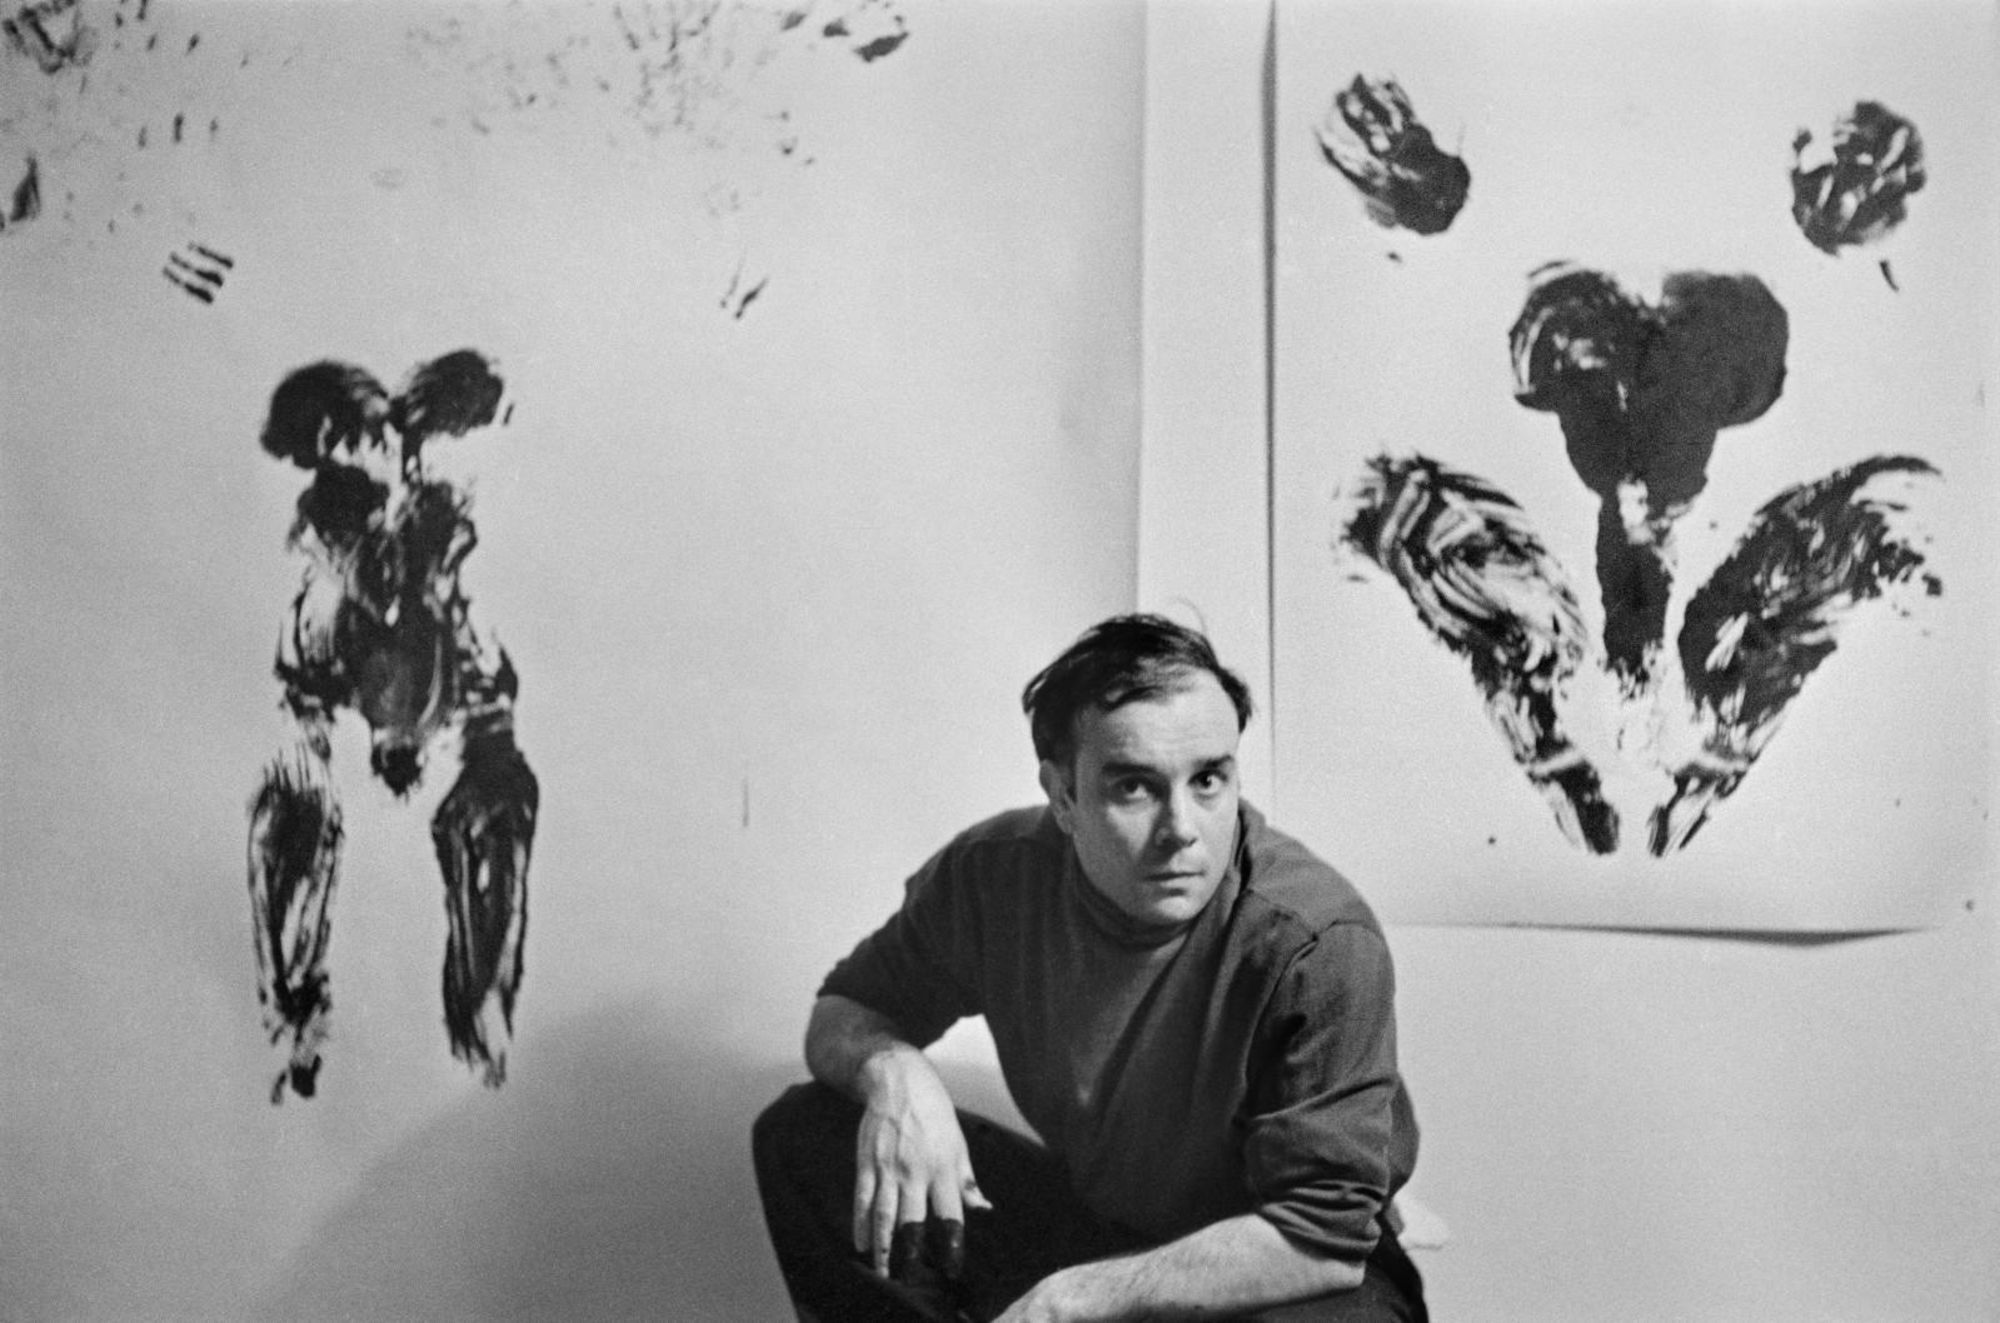 Yves Klein, pictured with his "Anthropométrie" paintings, died before he could stage "Sculpture Tactile," in which visitors can reach into a box and blindly touch a nude performer.